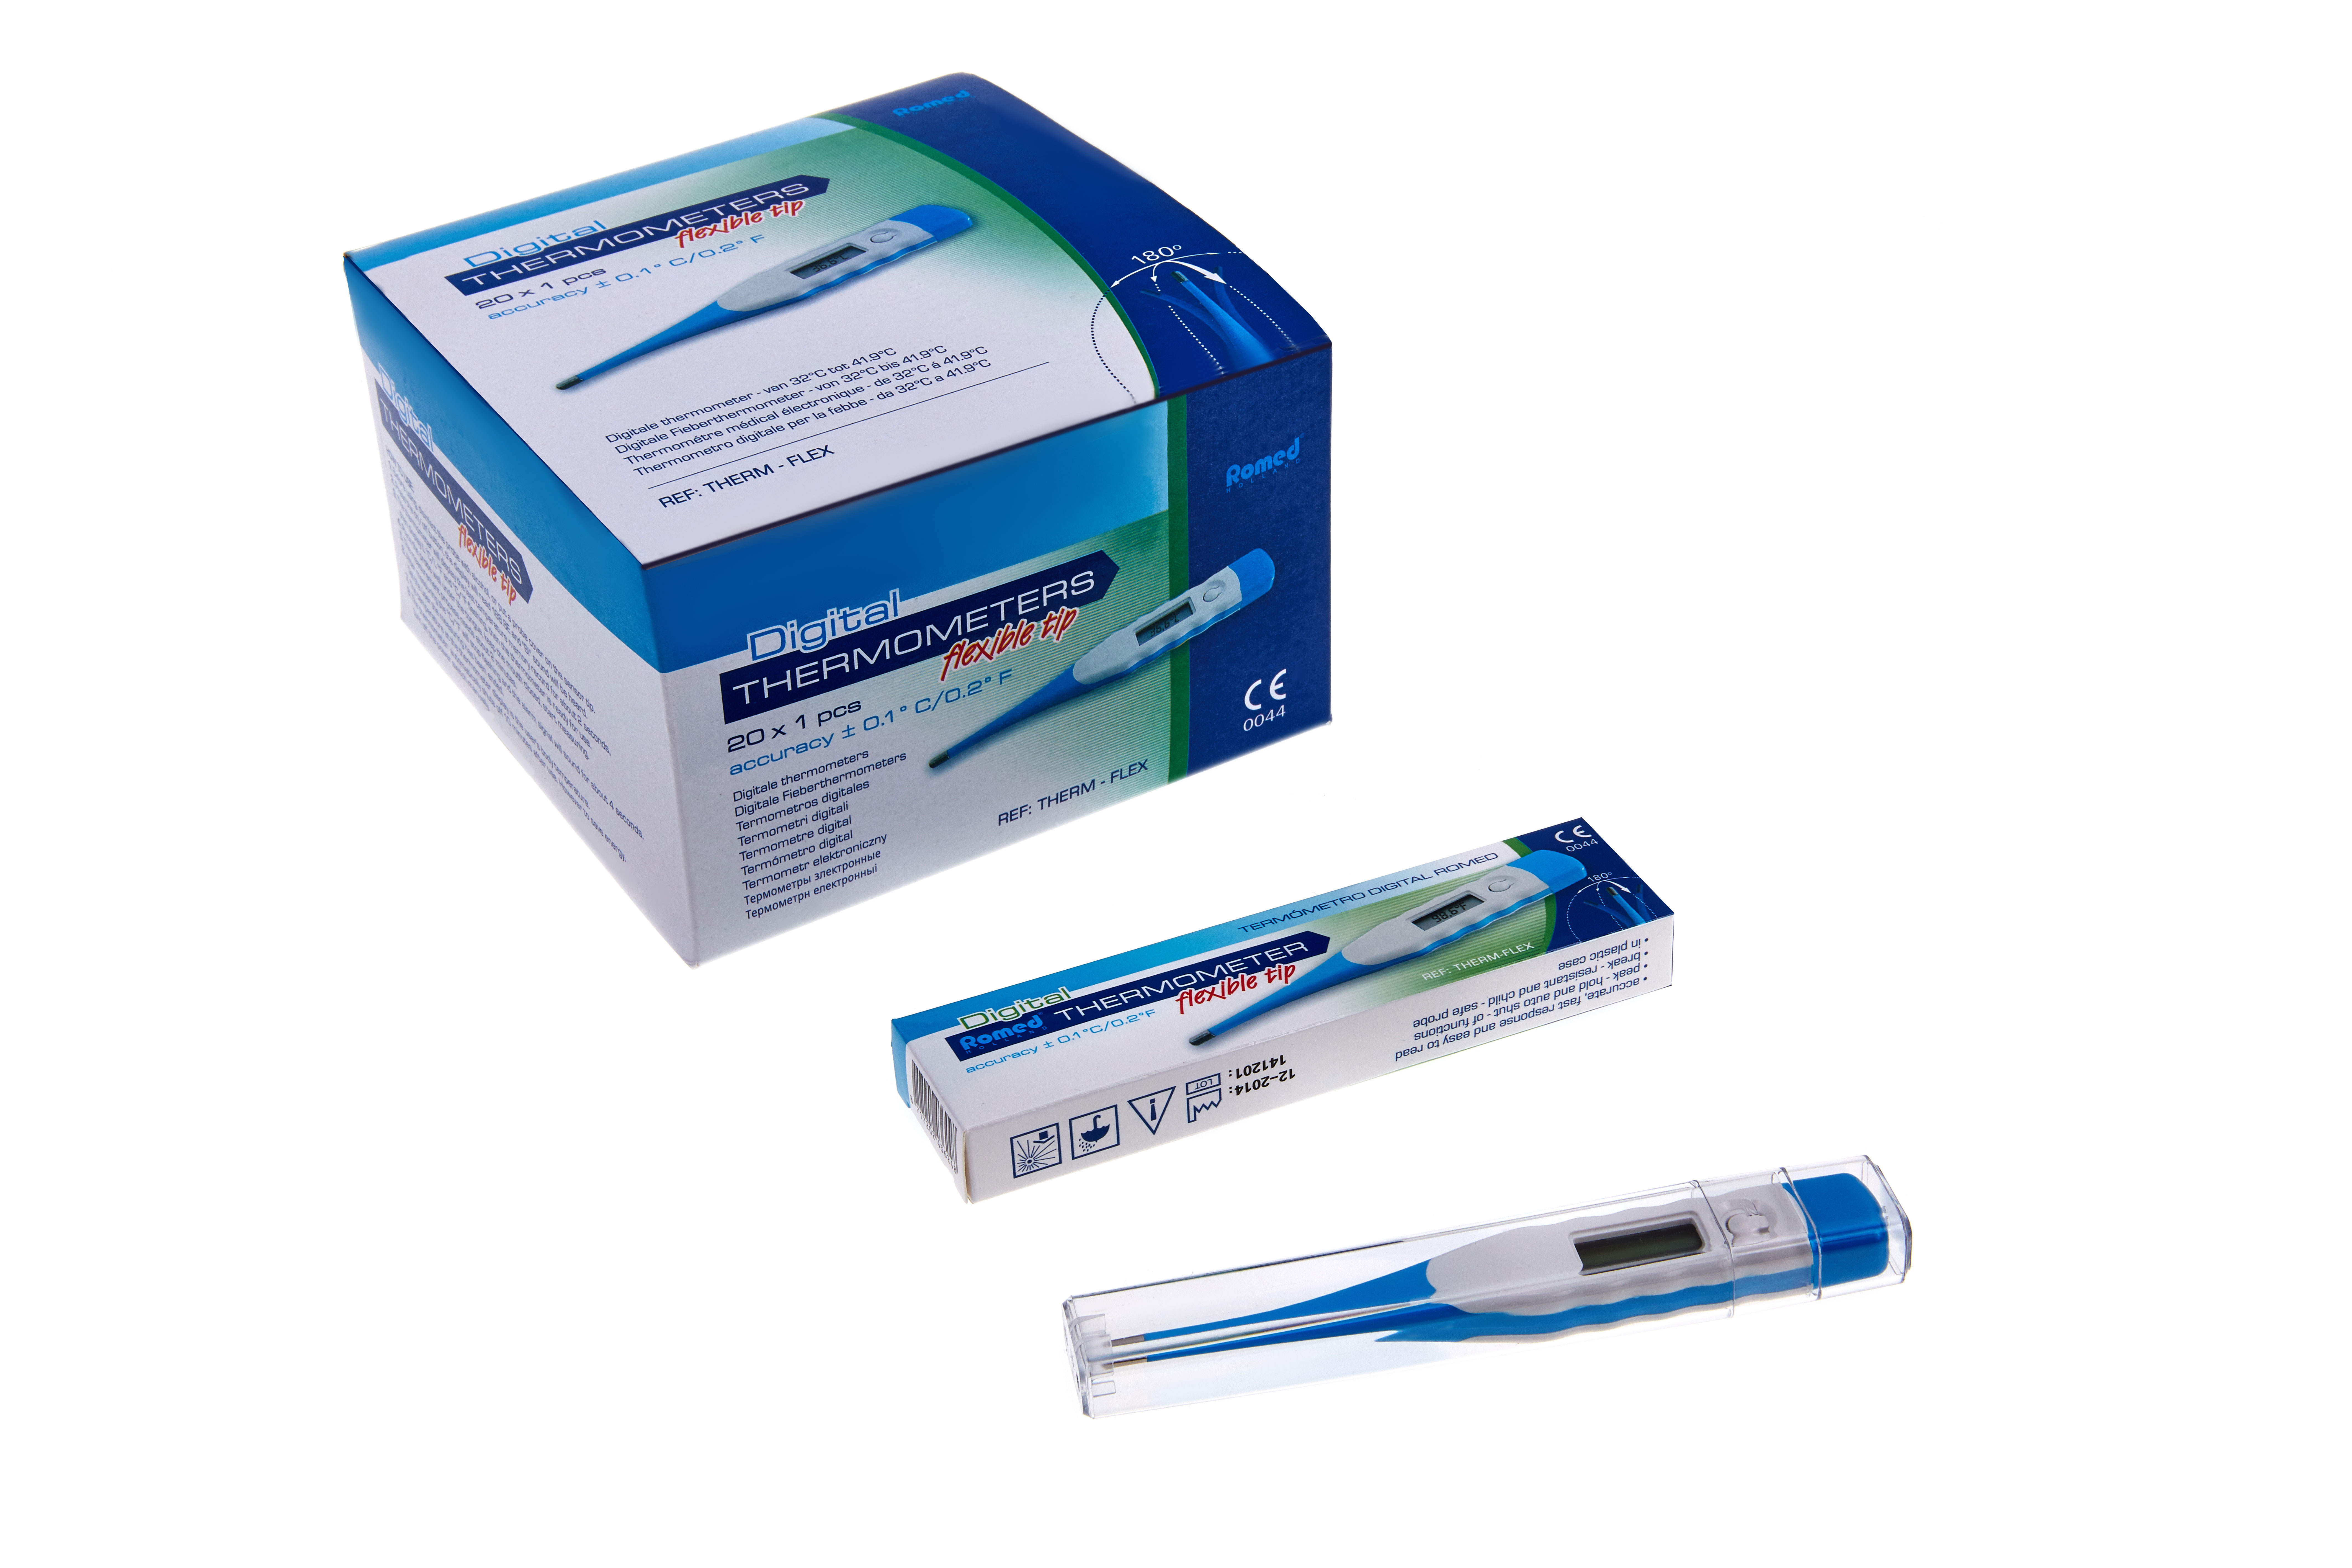 THERM-FLEX Romed thermometers, digital type, with flexible tip, per piece in small box, 20 pcs in an inner box, 10 x 20 pcs = 200 pcs in a carton.